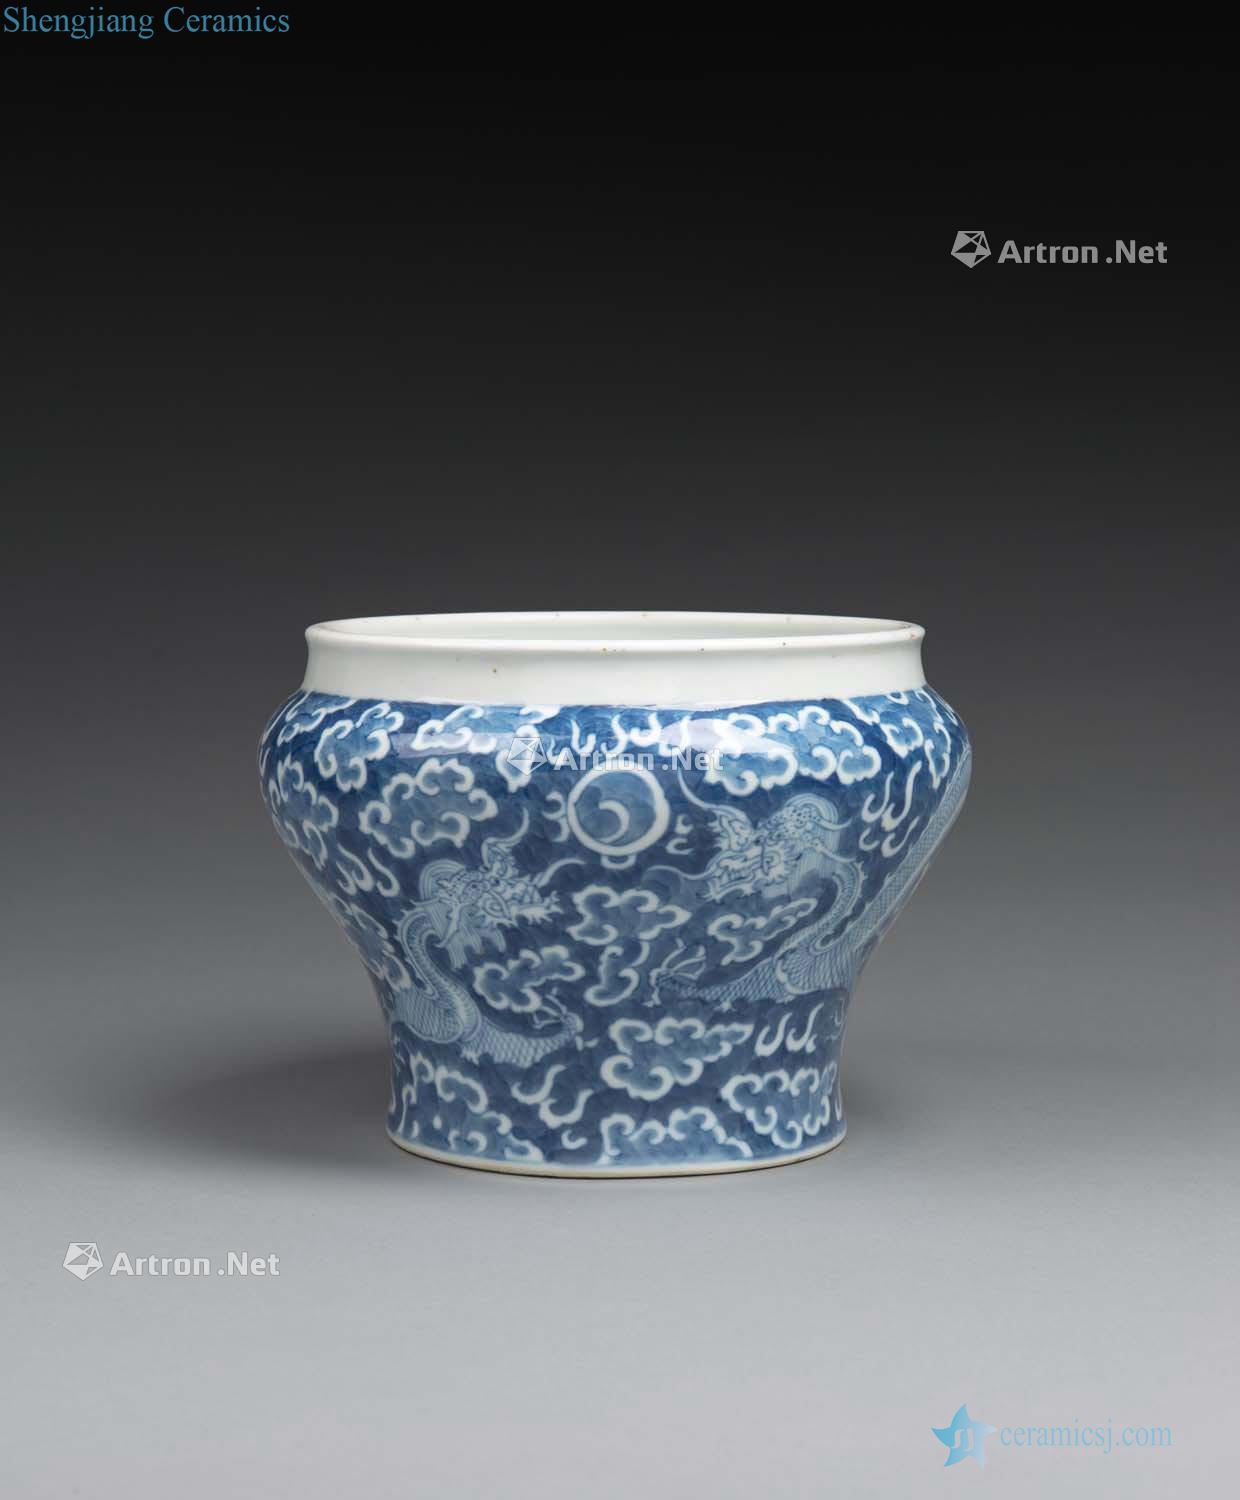 The 19th to 20th century in the late qing dynasty porcelain jar